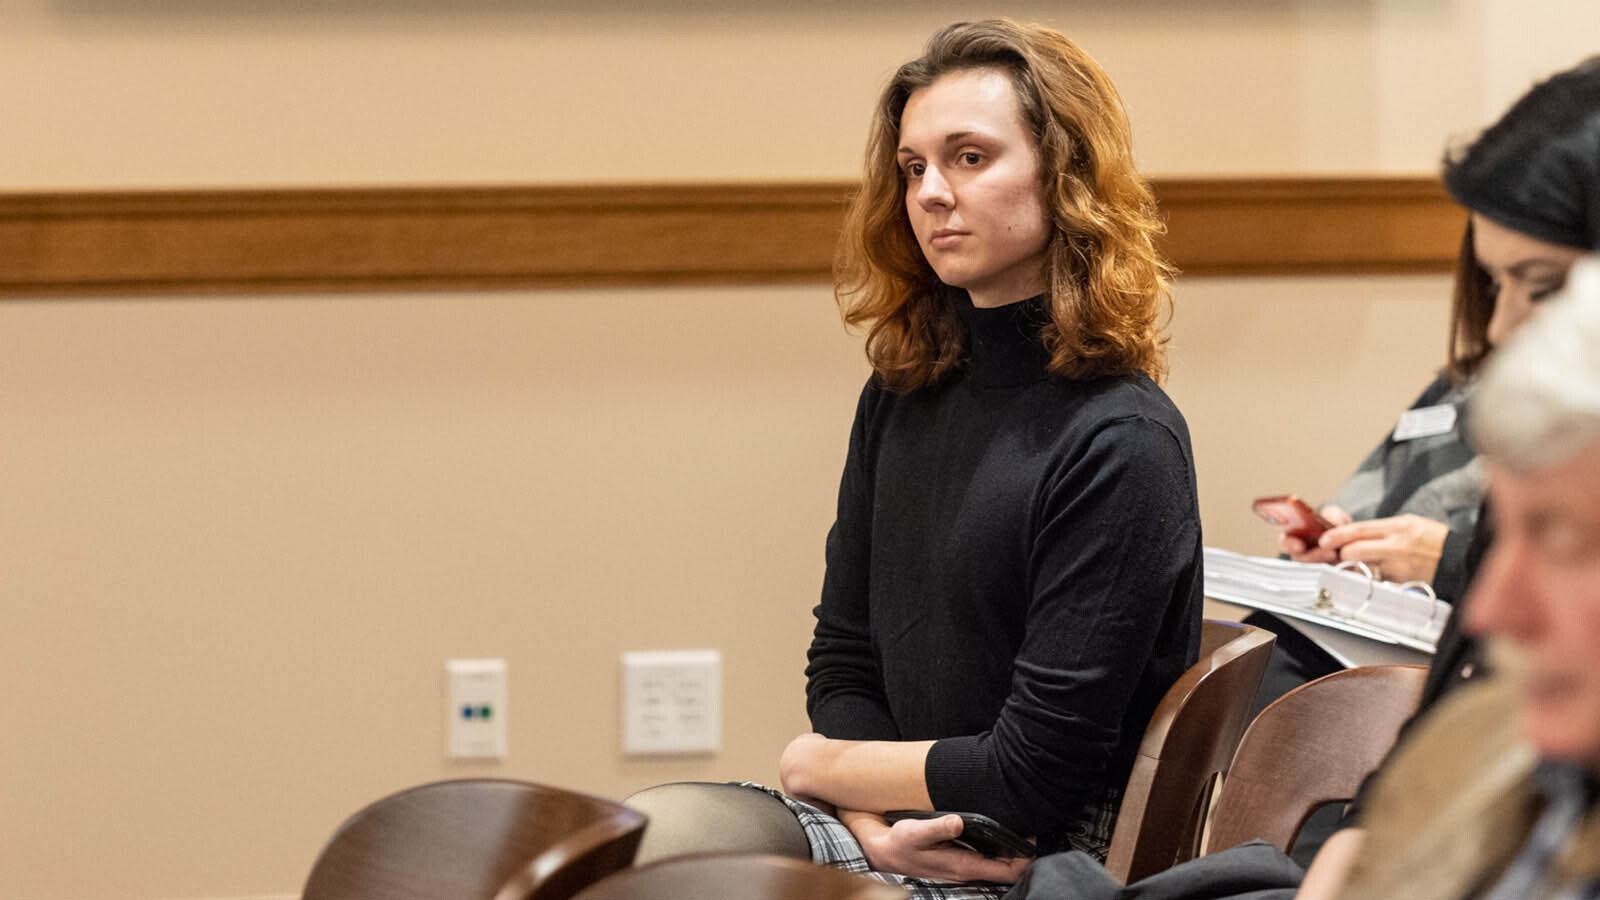 Luka Hein, a detransitioner who regrets taking hormones and having surgery as a teenager, testified in in support of Chloe's Law during the 2023 legislative session. Hein now lives as a young woman in accordance with her biological sex. Chole's Law failed, but a new bill outlawing transgender surgeries for children will be considered in the upcoming session.